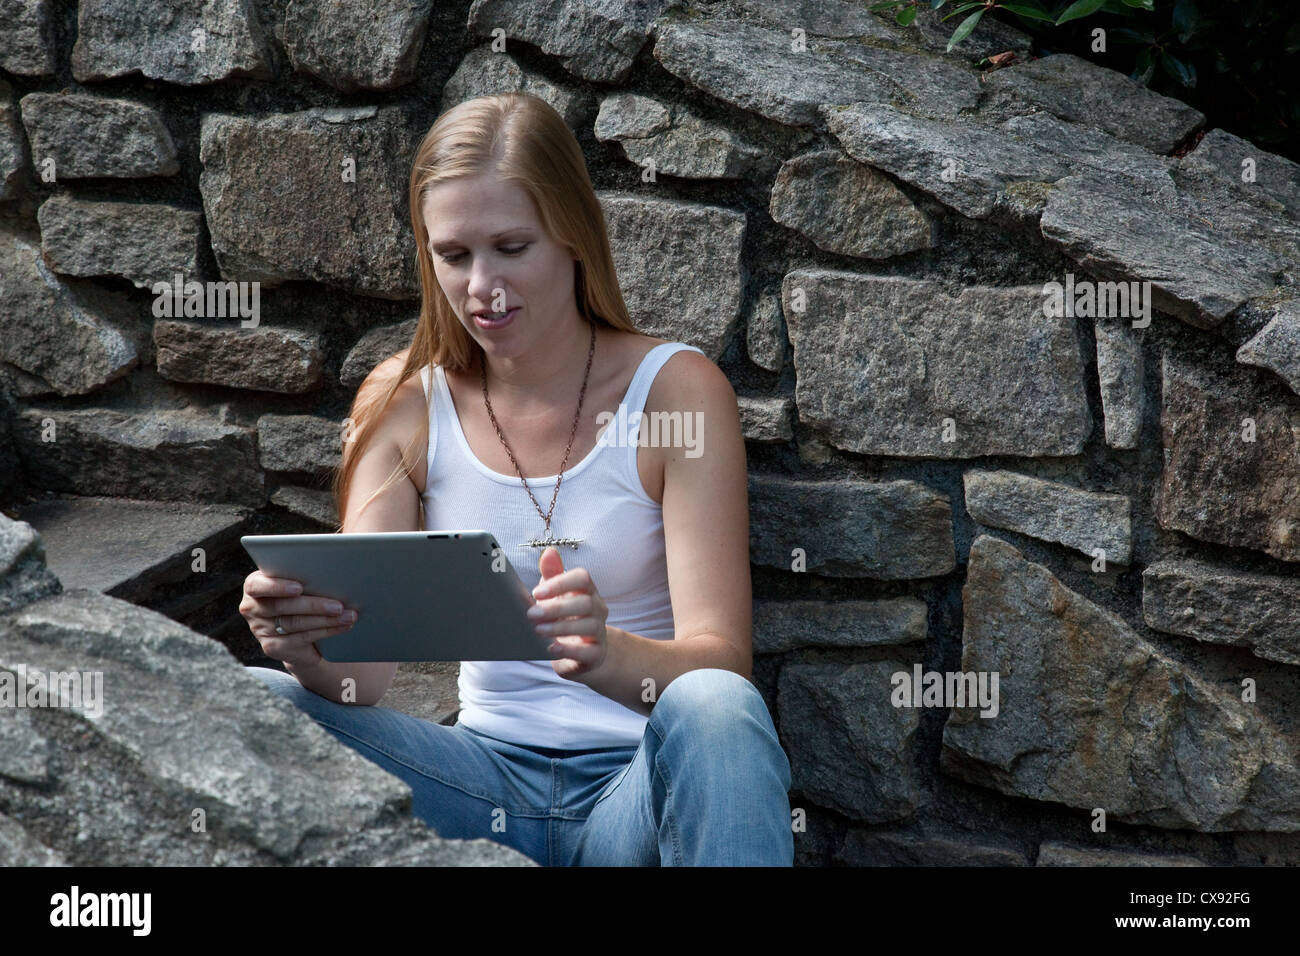 Pretty blond woman sitting outside on stone steps and working on a computer tablet in the warm sunshine. Stock Photo